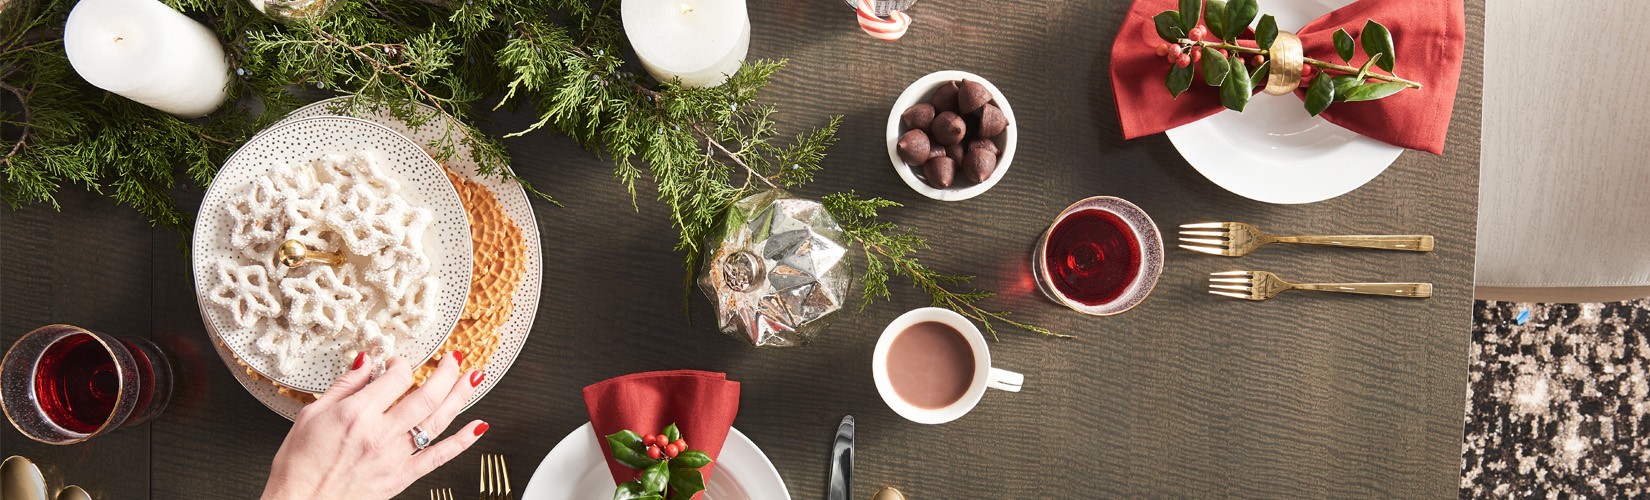 Christmas Entertaining: 5 Things You Need to Host the Perfect Dinner Party